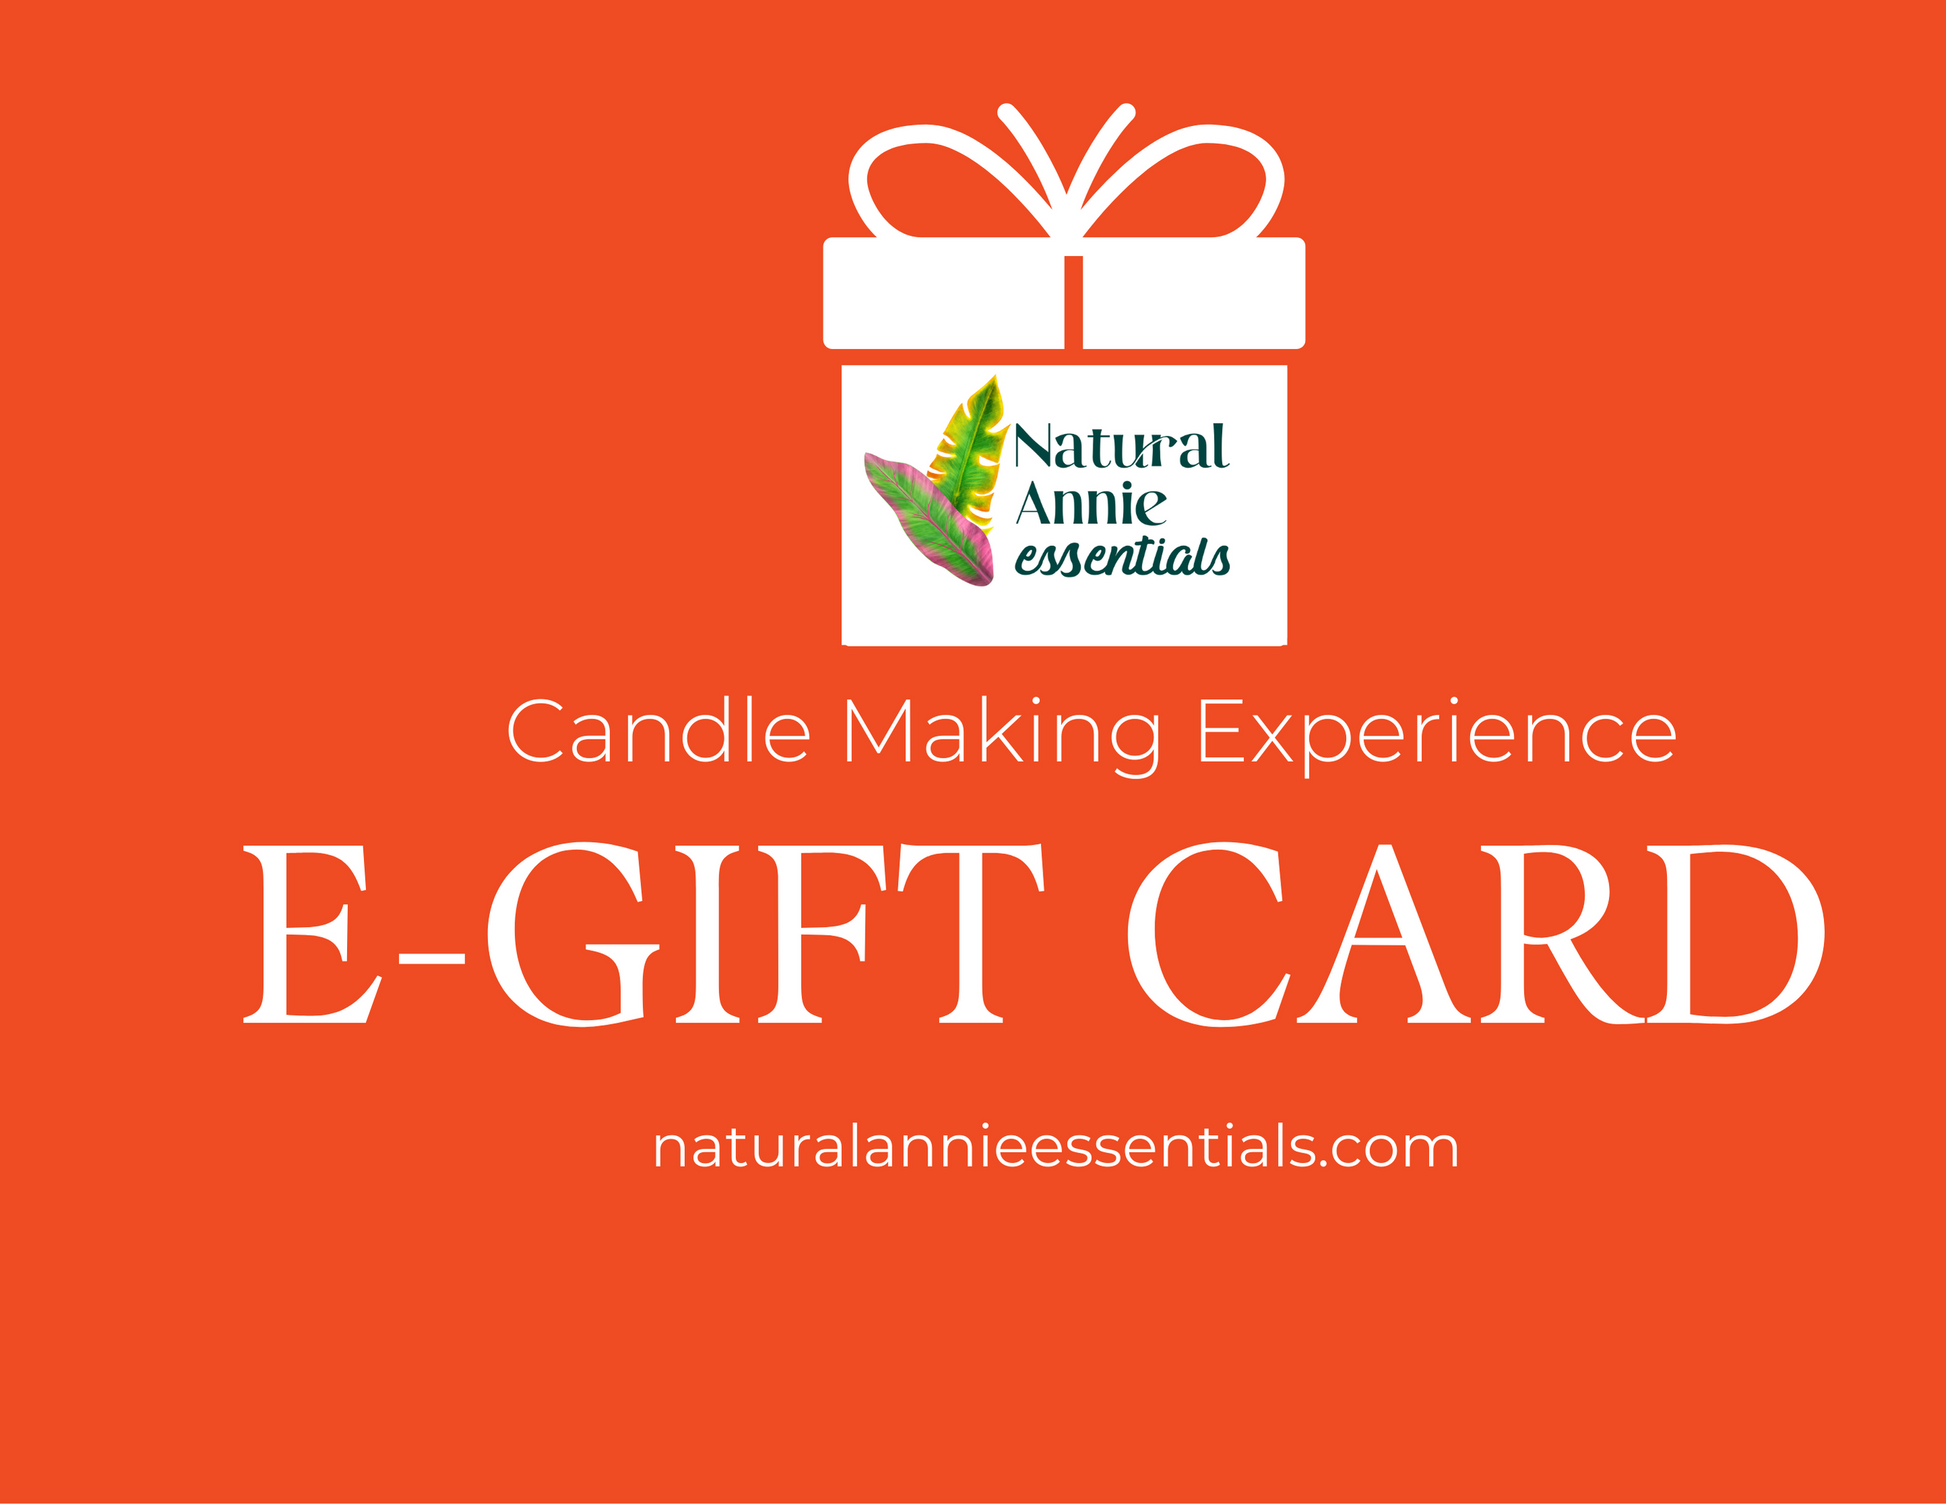 Sip & Pour Candle Making Experience Candle Bar E-Gift Card - Candlemakingbar